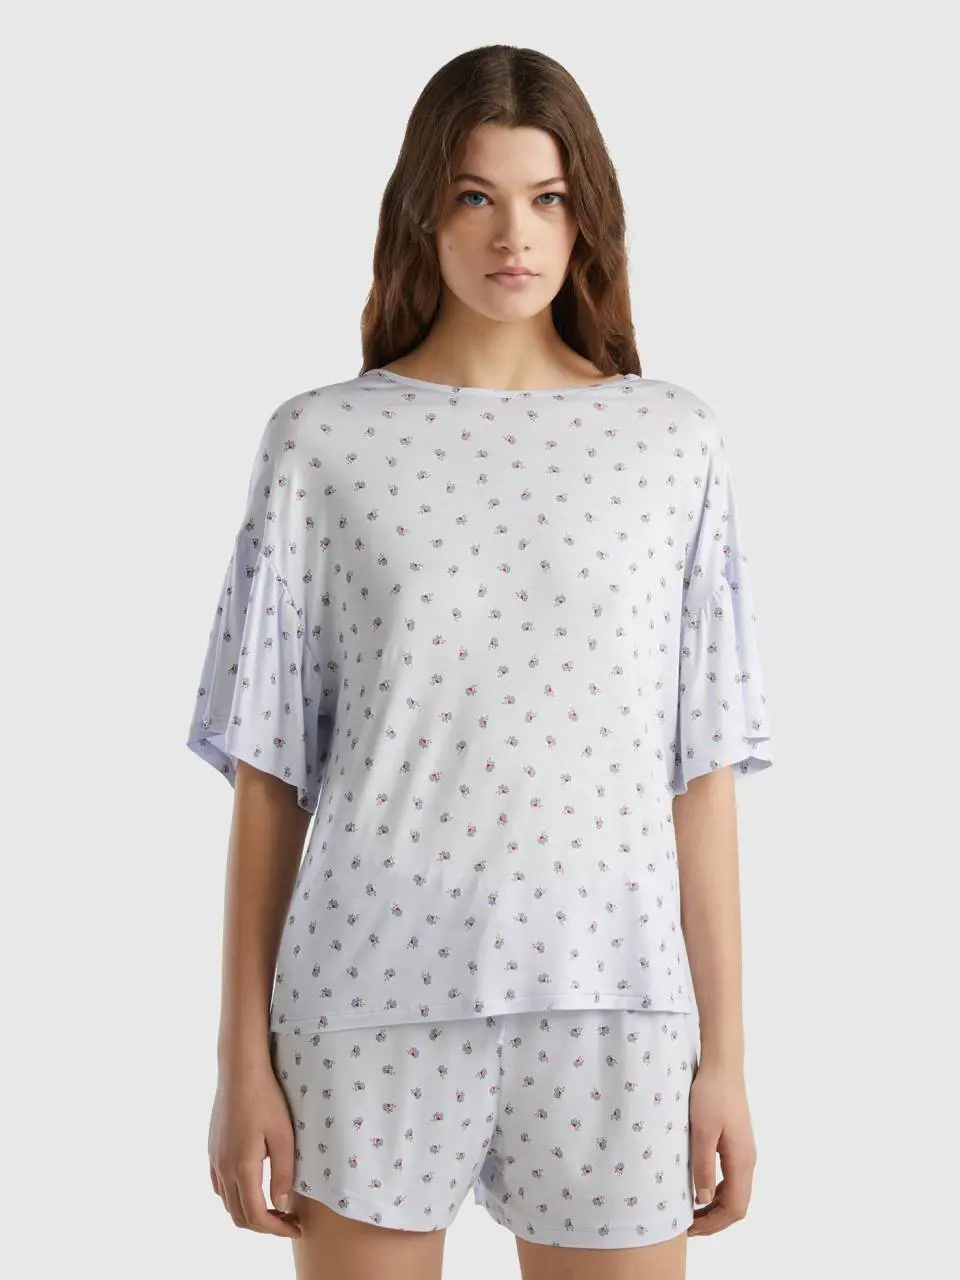 Benetton floral t-shirt in sustainable viscose. 1